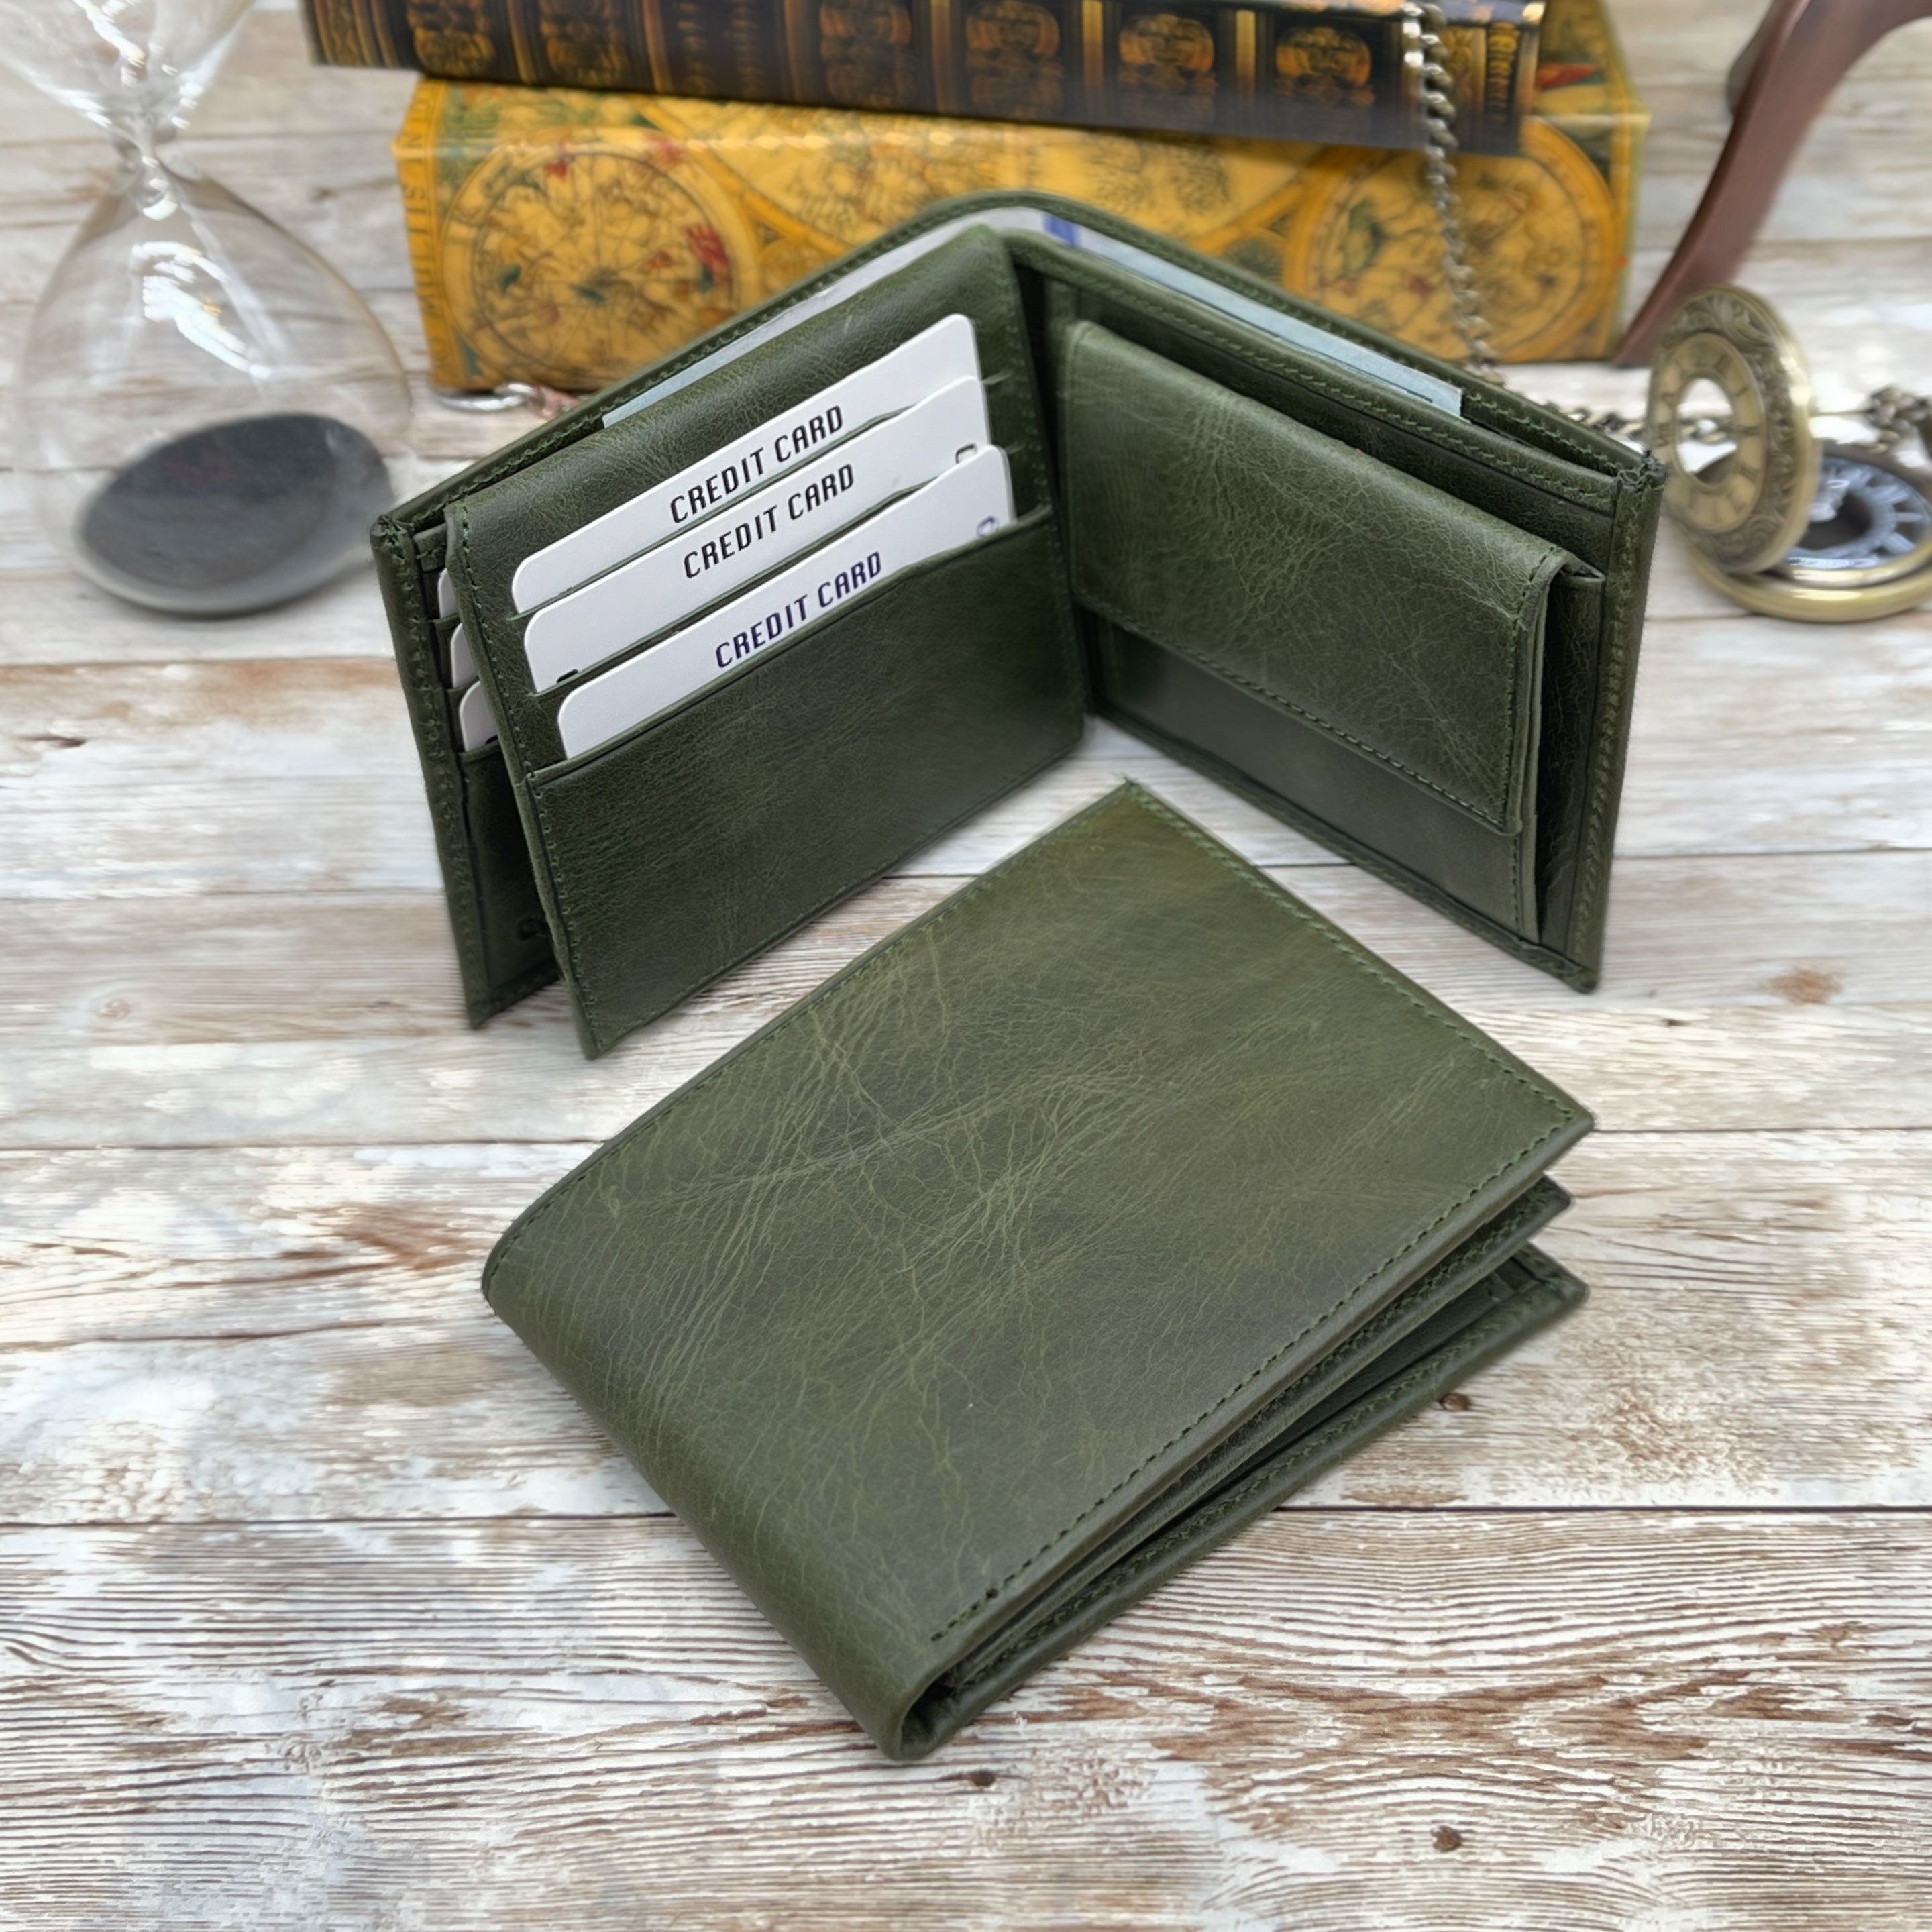 Customizable red and green men's wallet BRUCLE | Gift yourself true style